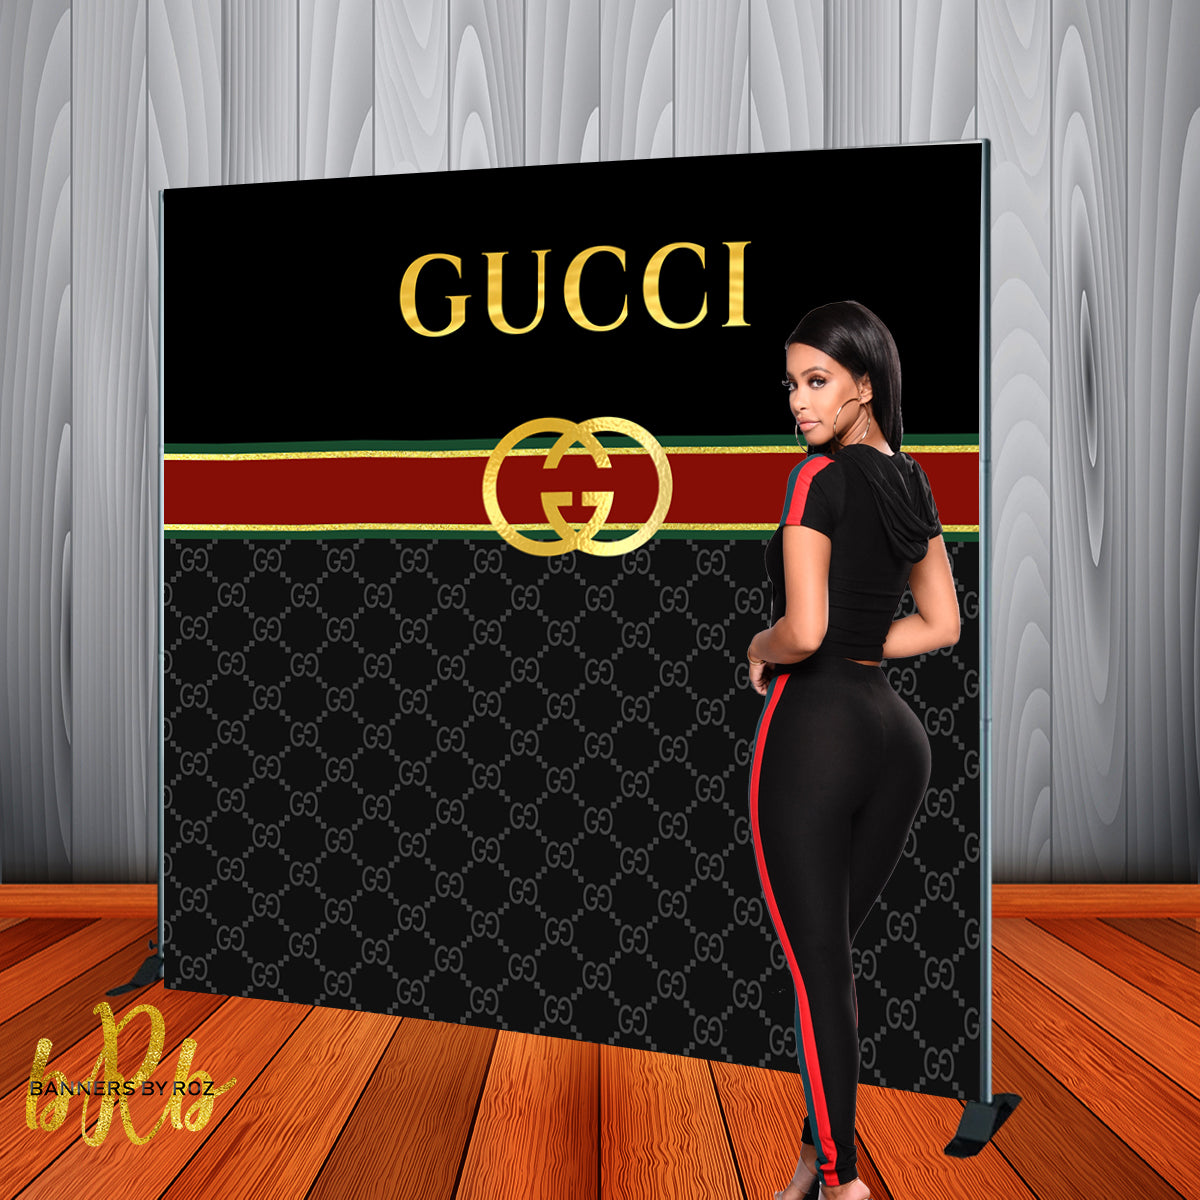 Forfatning Gemme Meningsfuld Gucci inspired Backdrop - Step & Repeat - Designed, Printed & Shipped! –  Banners by Roz